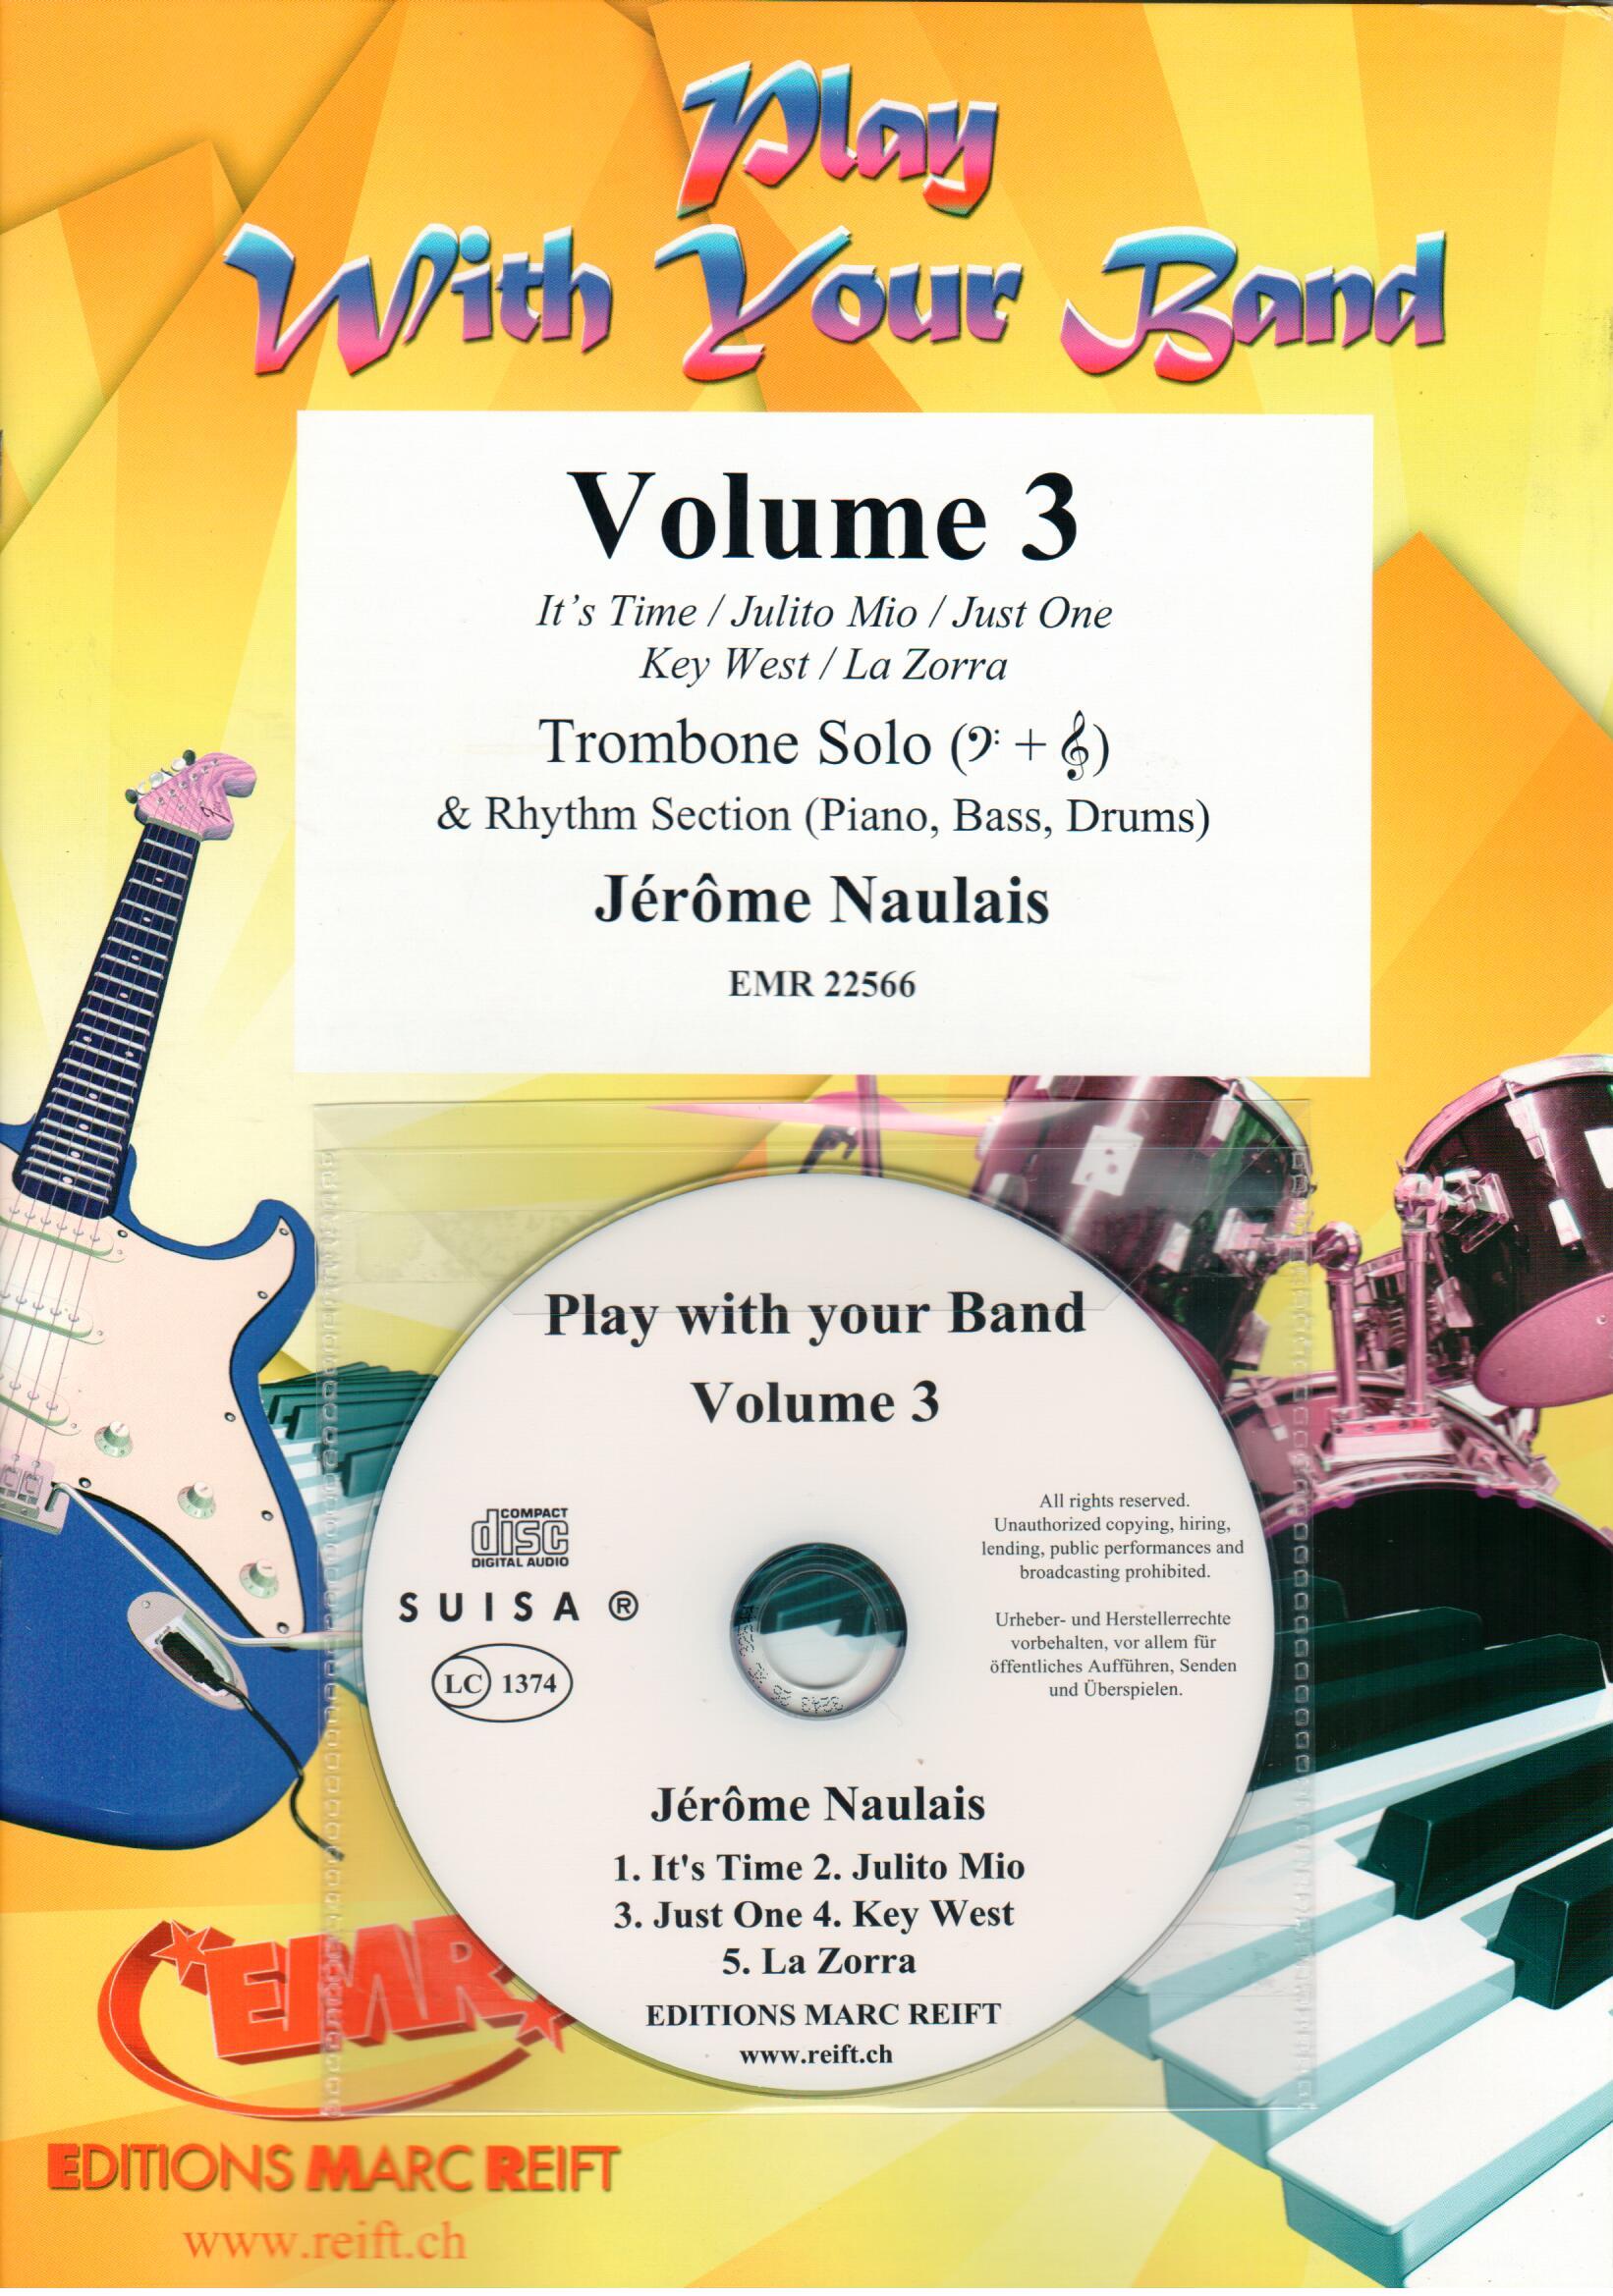 PLAY WITH YOUR BAND VOLUME 3, SOLOS - Trombone